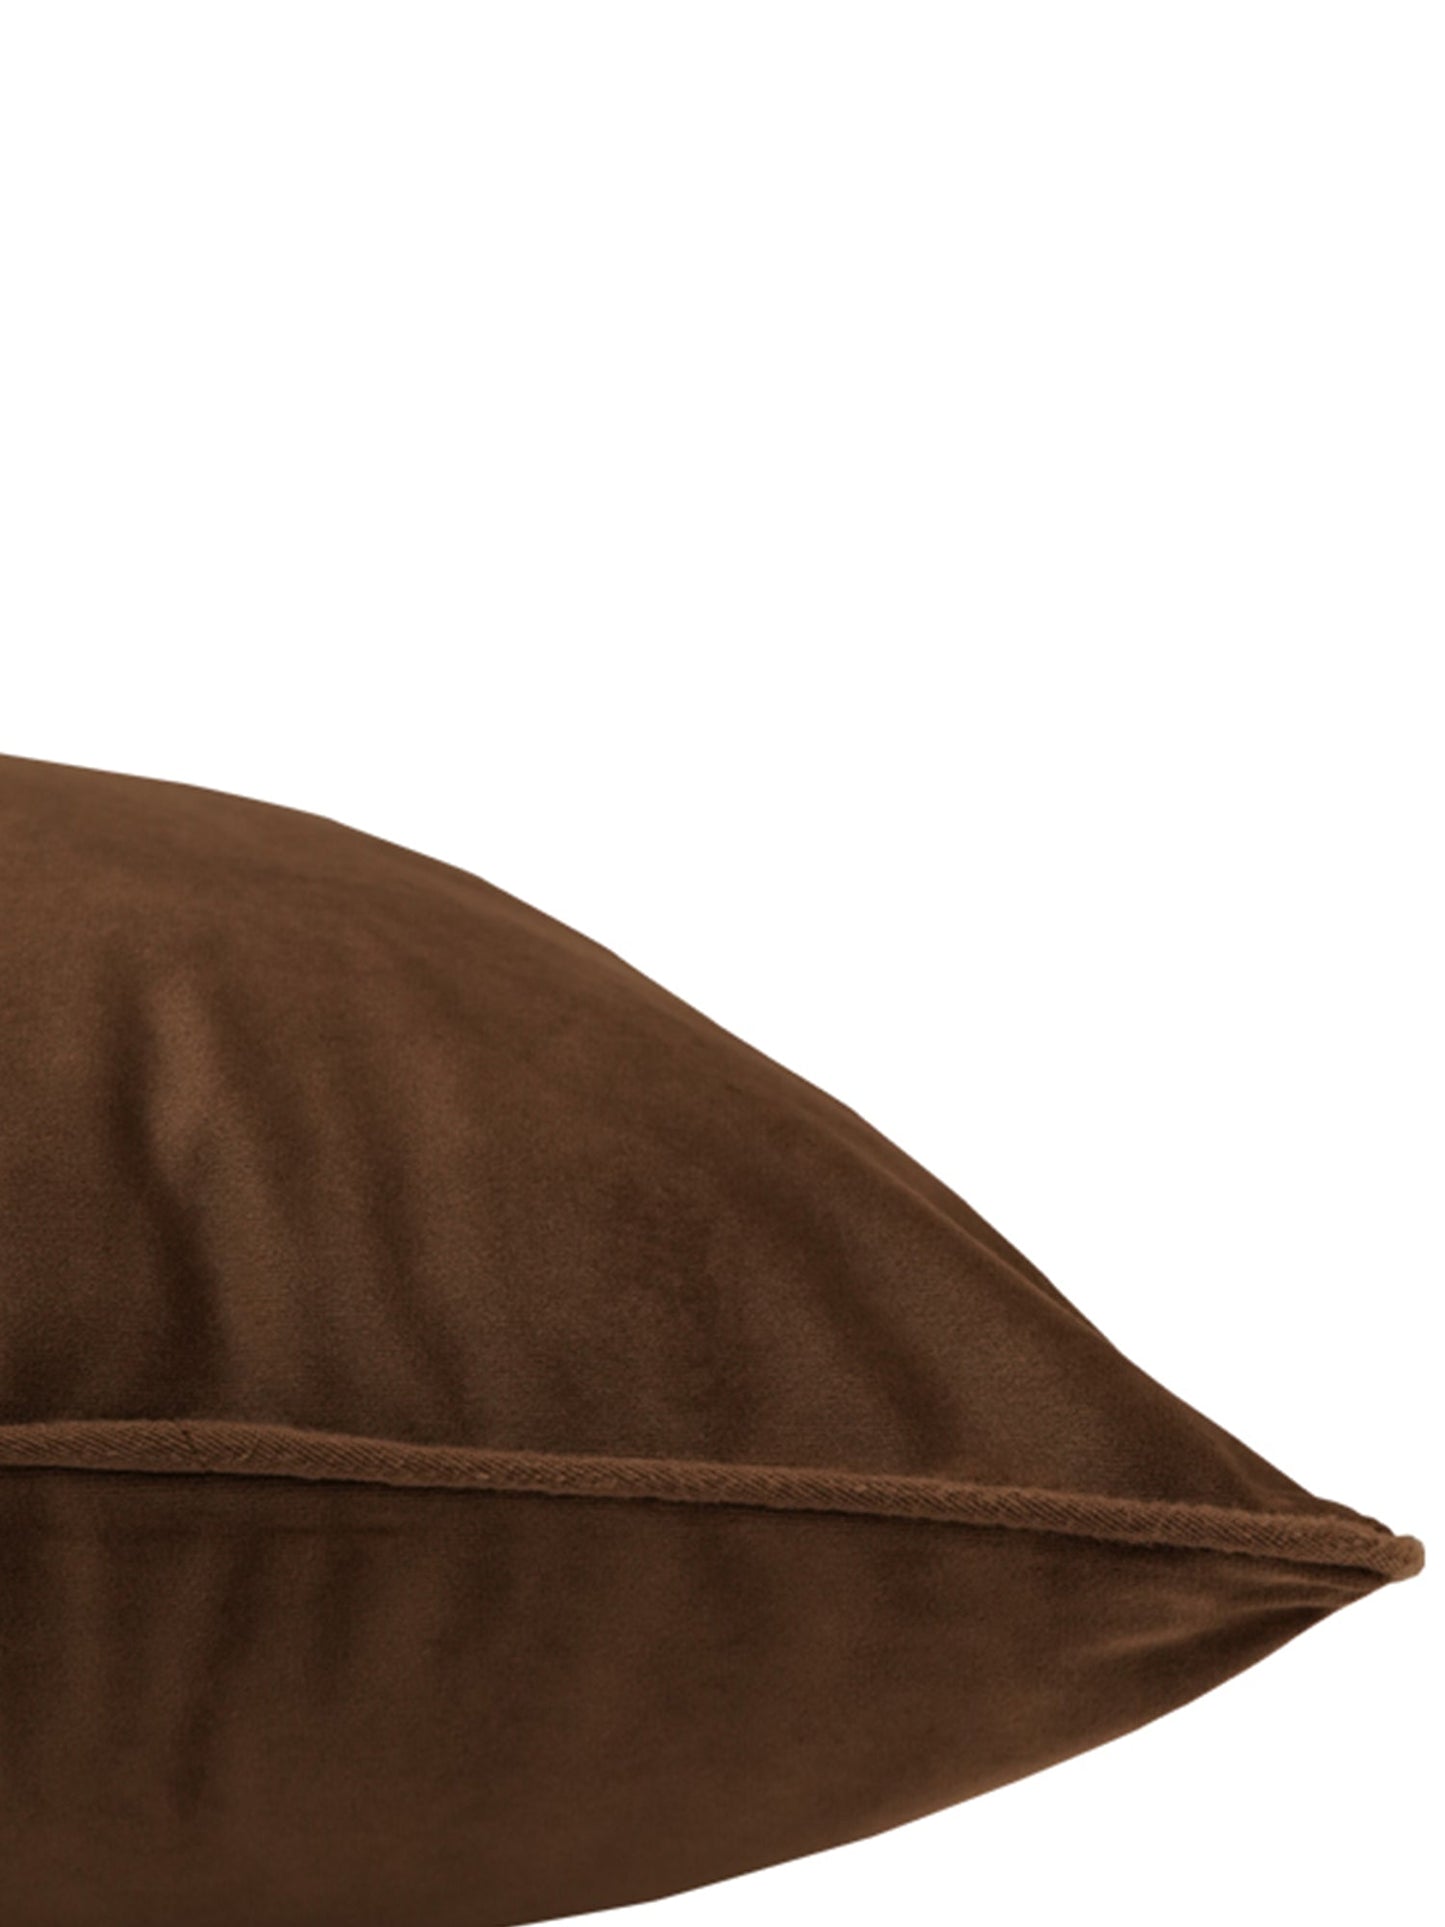 Cushion Cover Solid Velvet Brown - 16"X16"